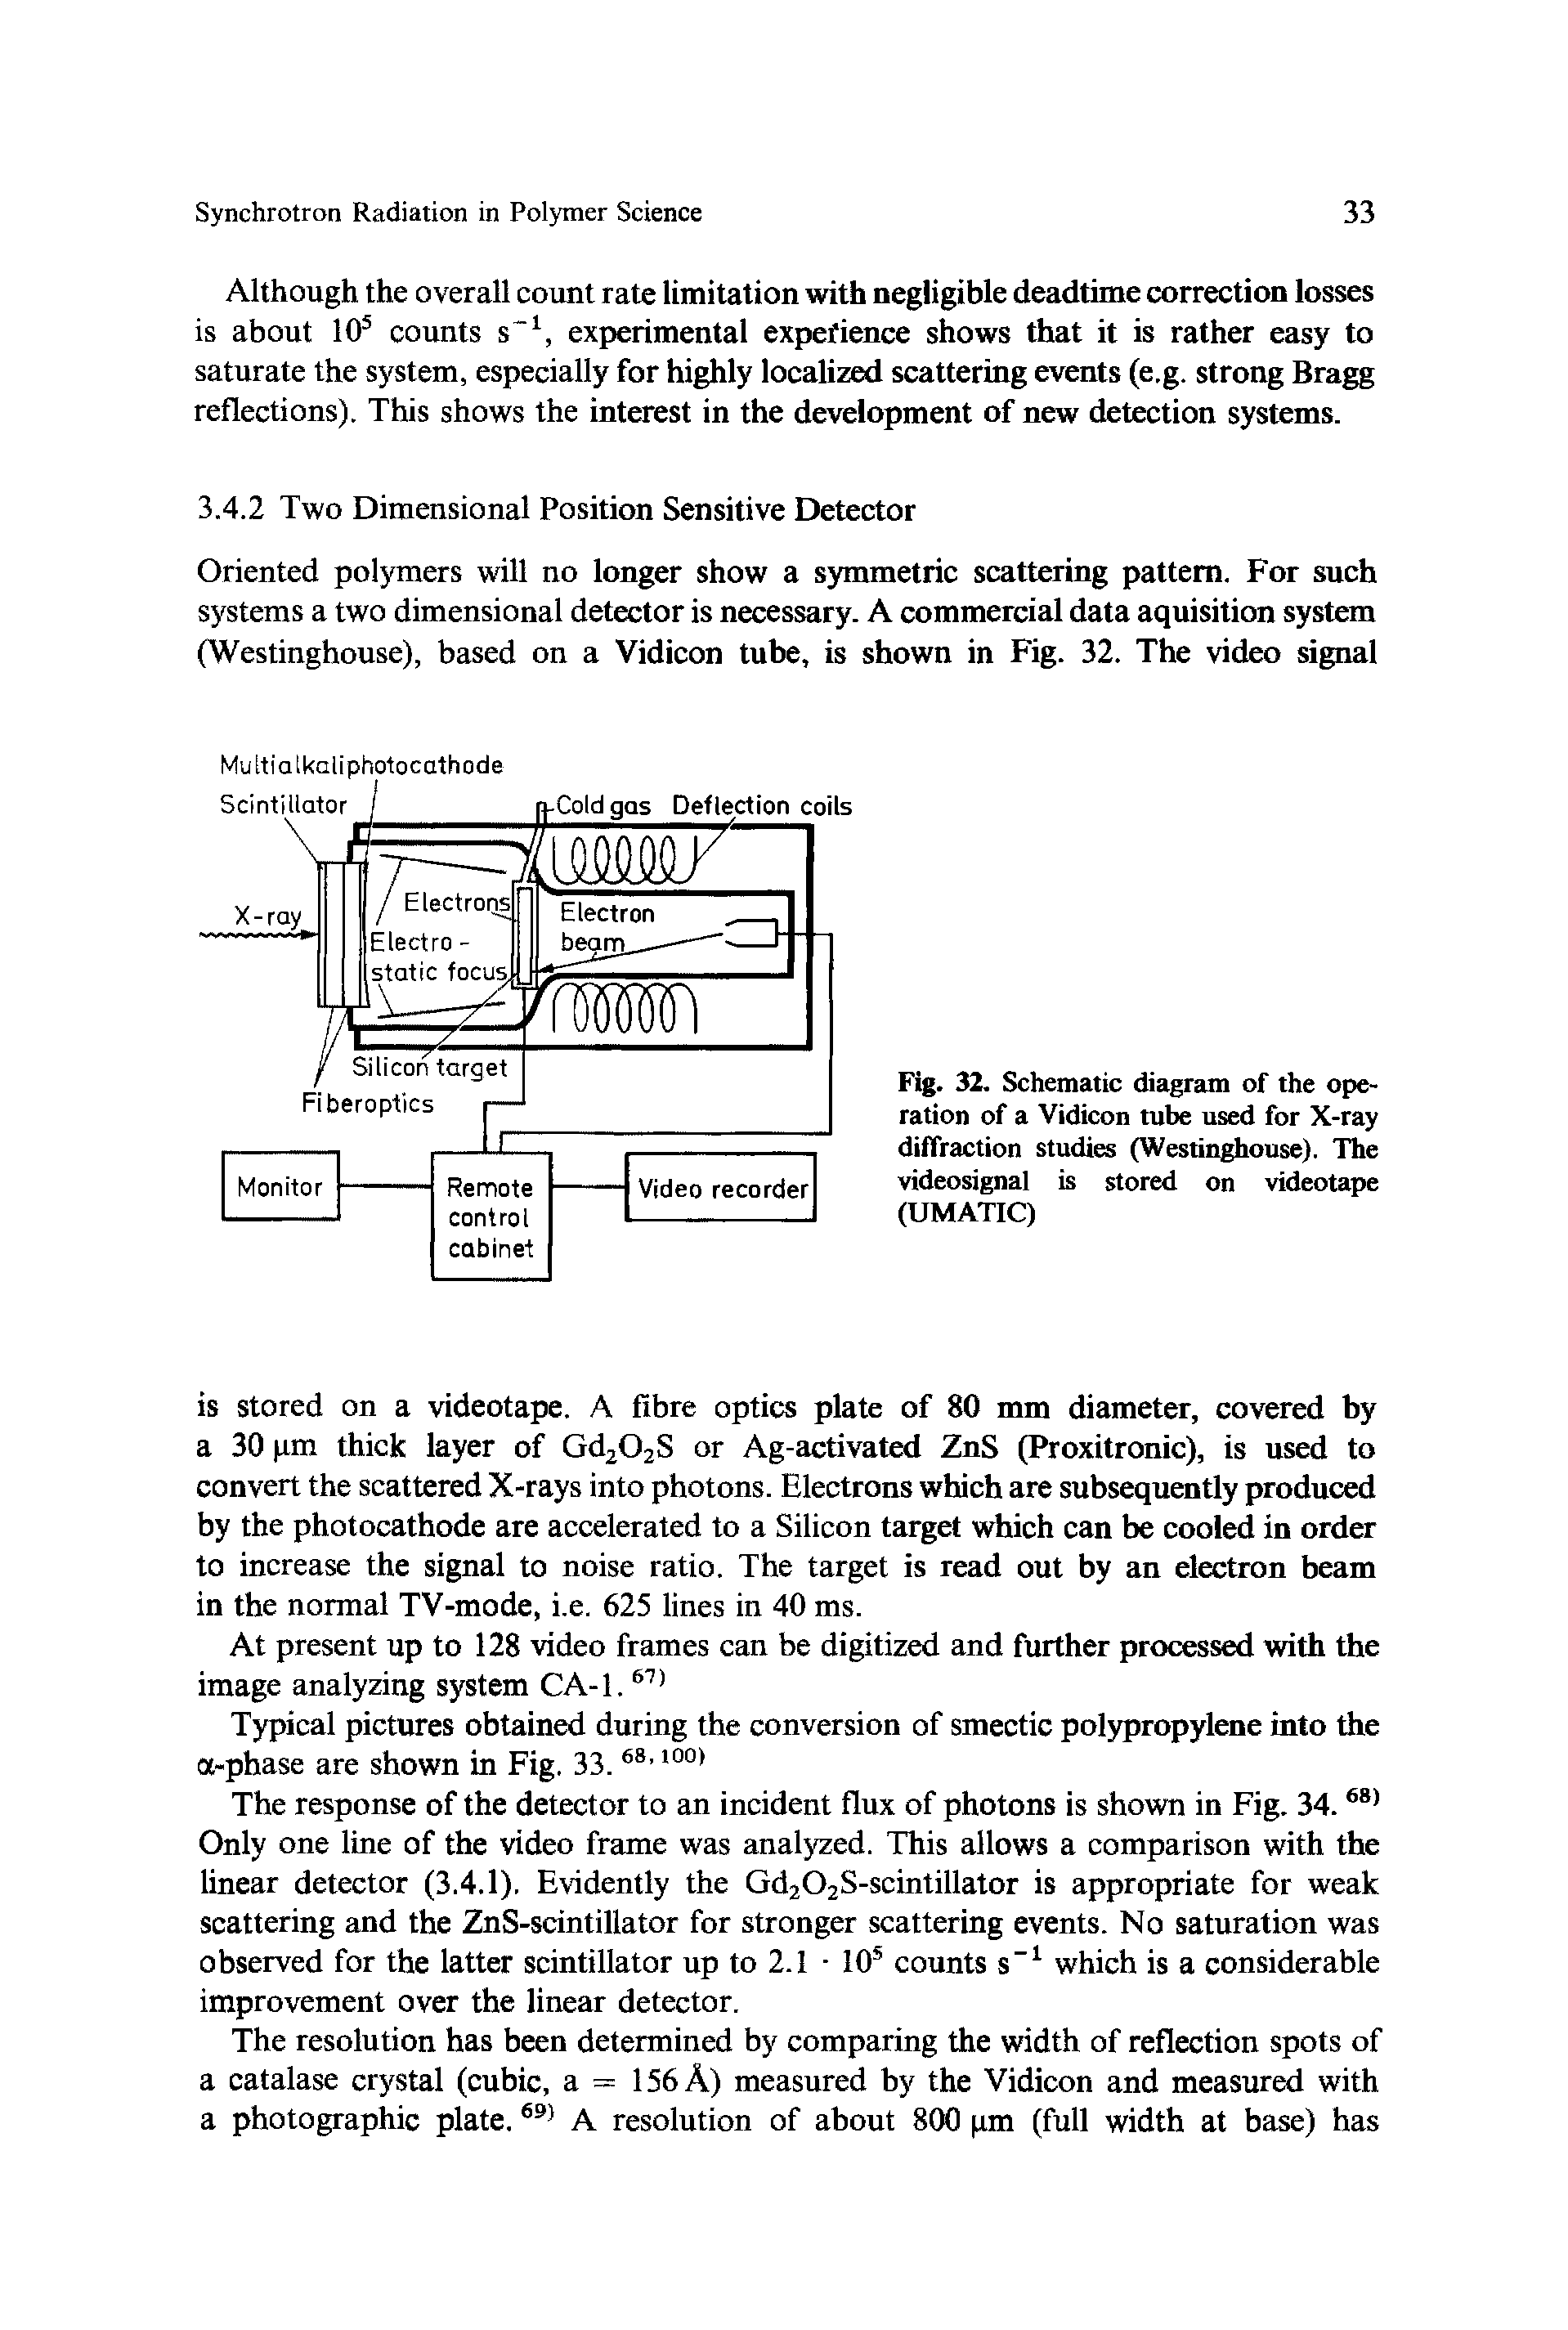 Fig. 32. Schematic diagram of the operation of a Vidicon tube used for X-ray diffraction studies (Westinghouse). The videosignal is stored on videotape (UMATIC)...